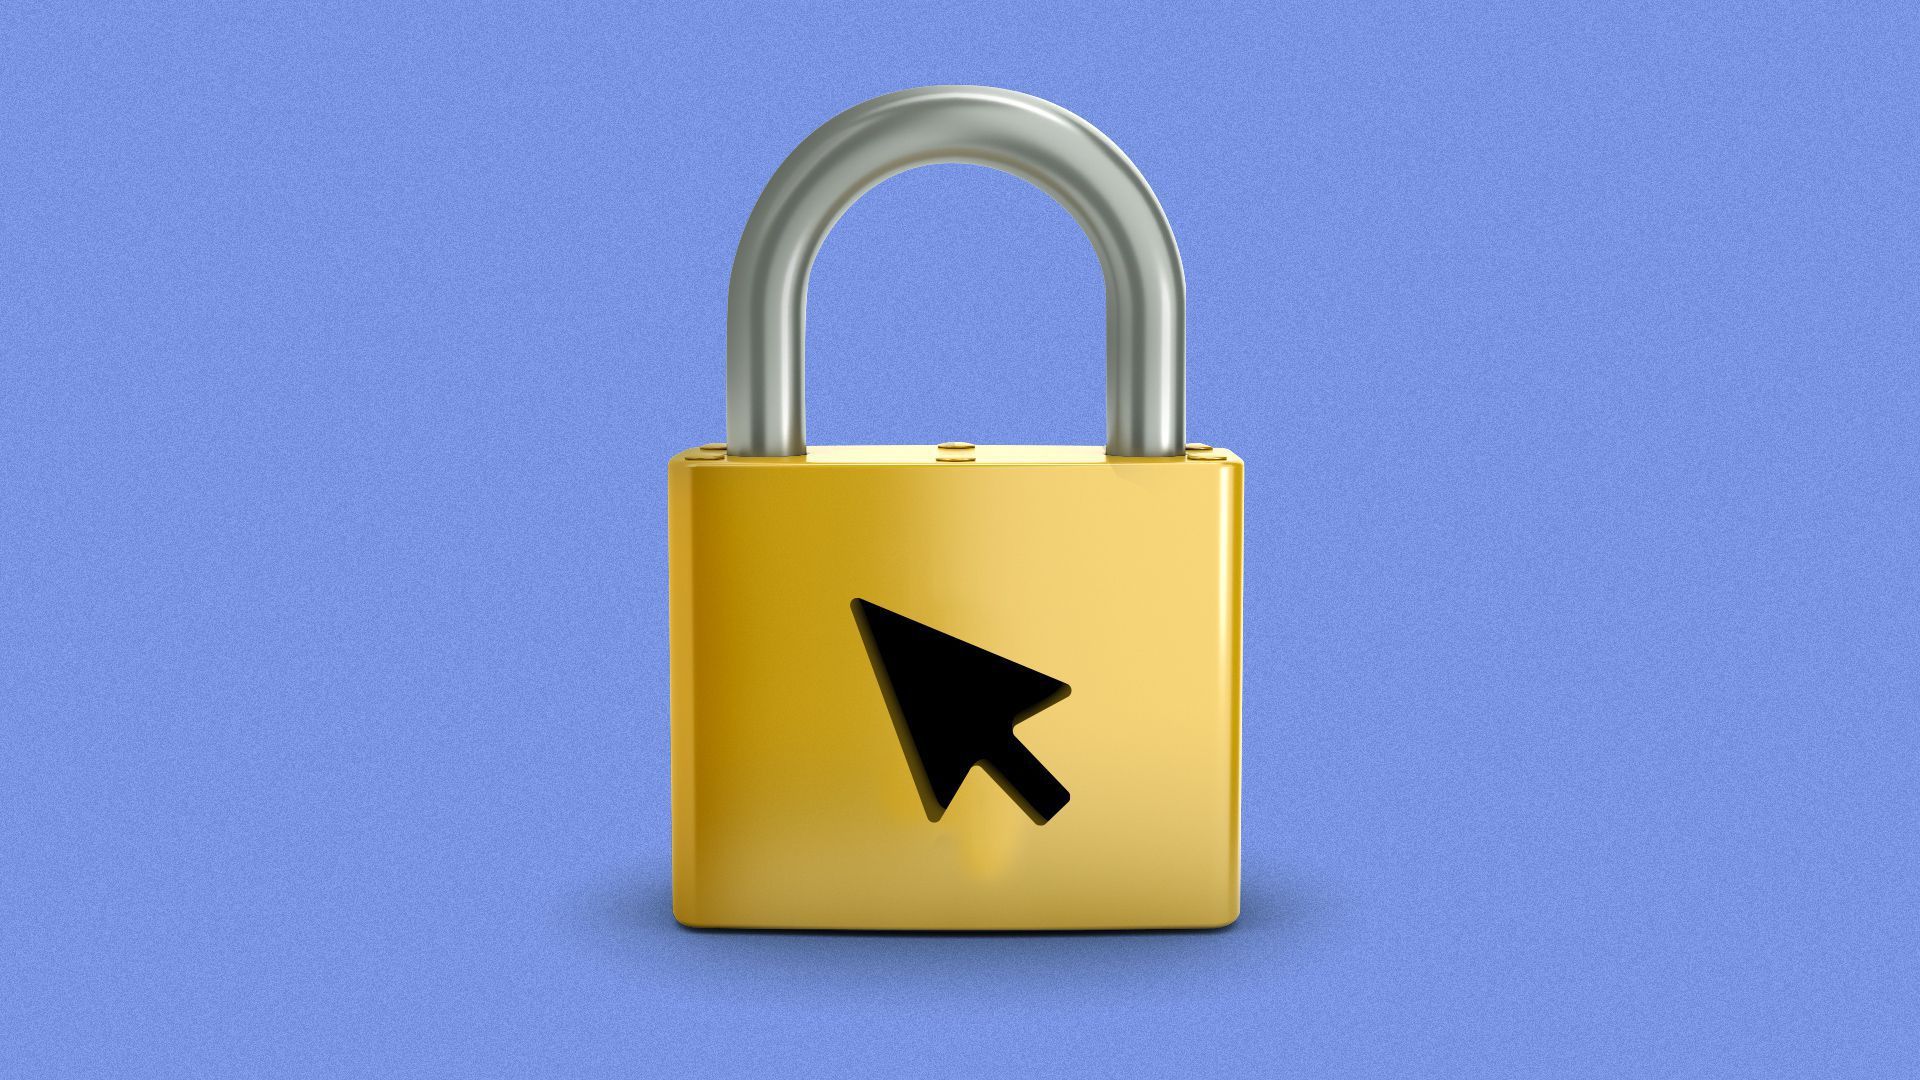 Illustration of a padlock with a mouse cursor on it.